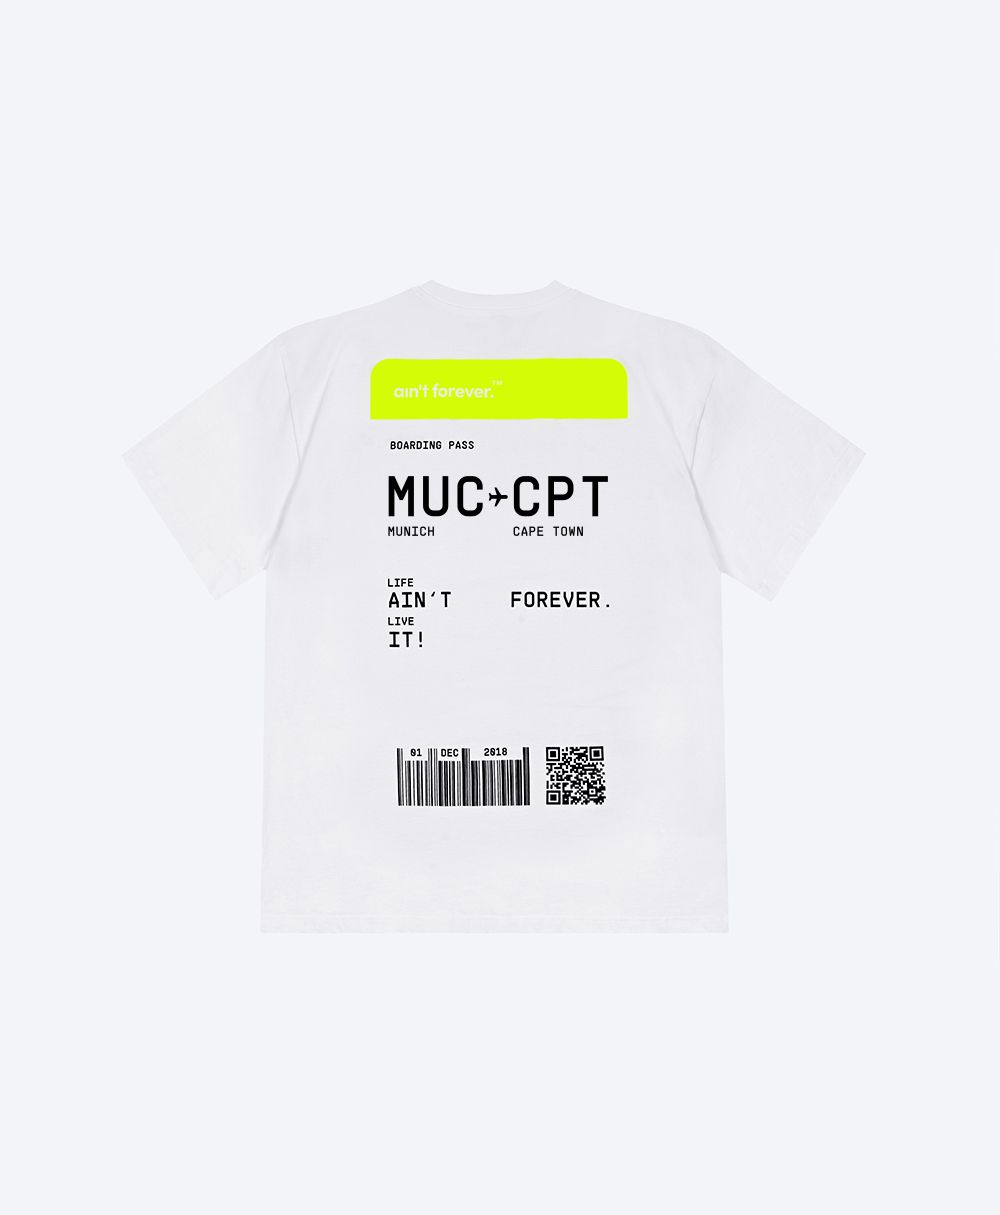 THE OVERSIZED BOARDING PASS T-SHIRT (MUC - CPT)